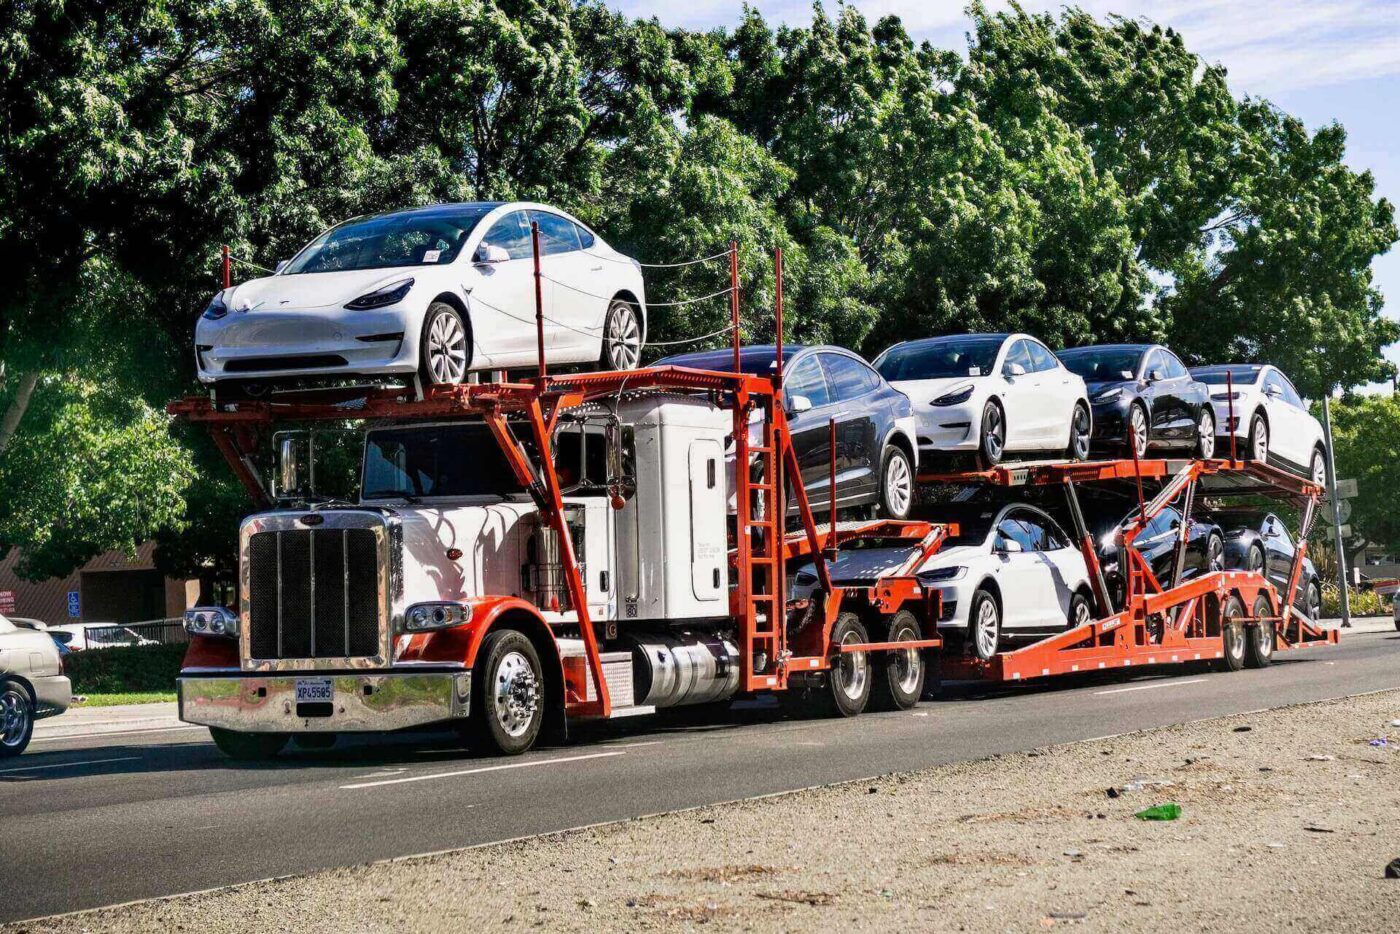 A USA auto transport truck filled with cars